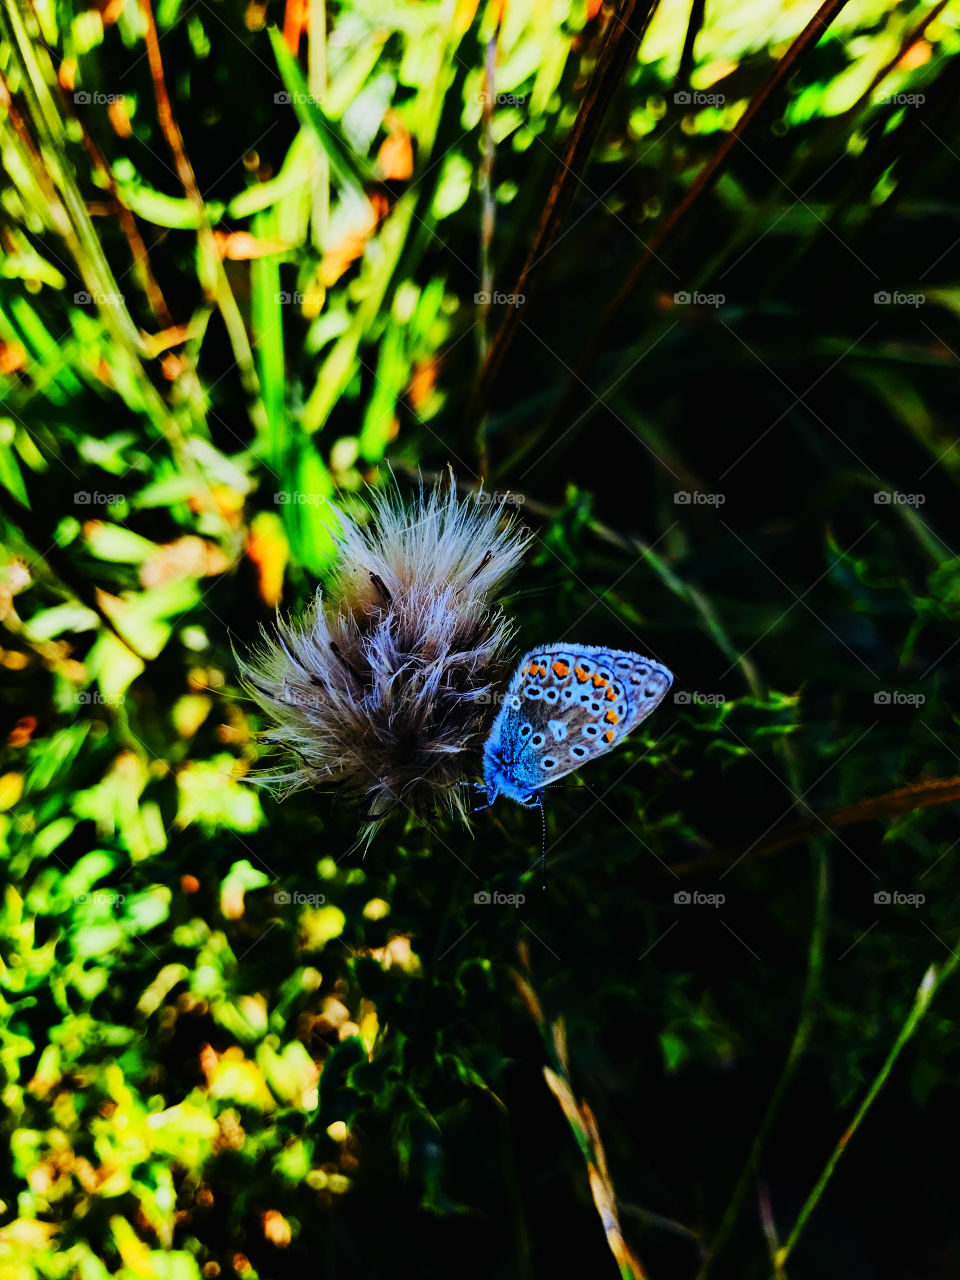 Butterfly in the wild 